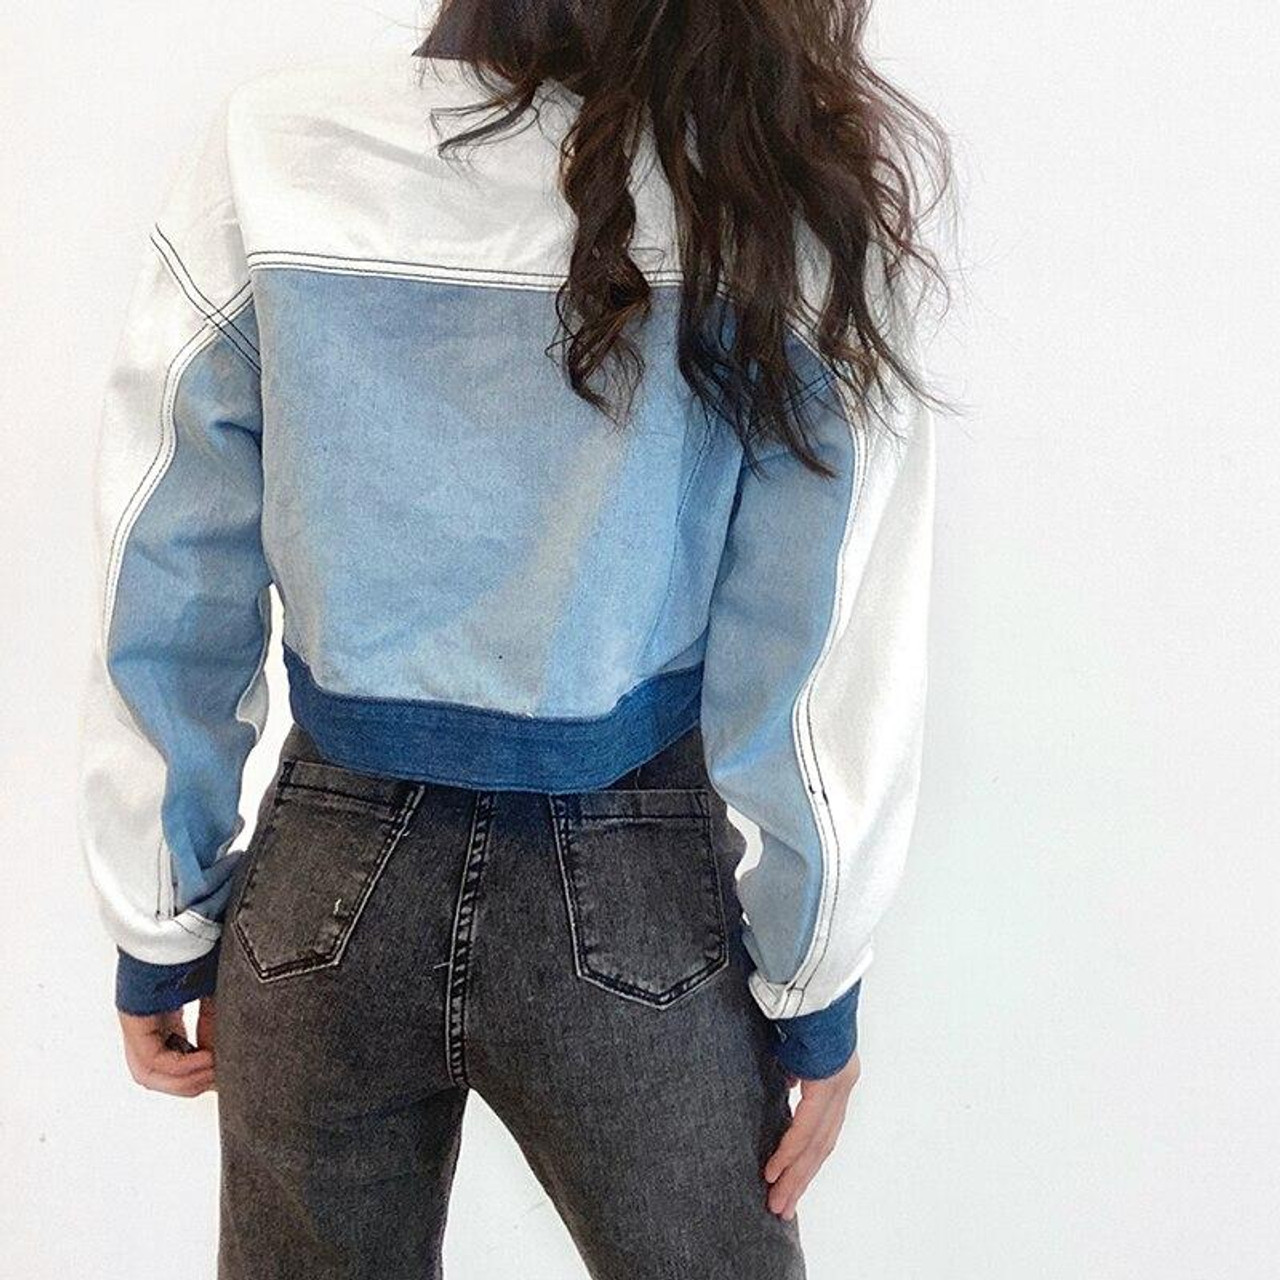 INDIE AESTHETIC DOUBLE POCKET COLLARED BLUE JEAN JACKET - Cosmique